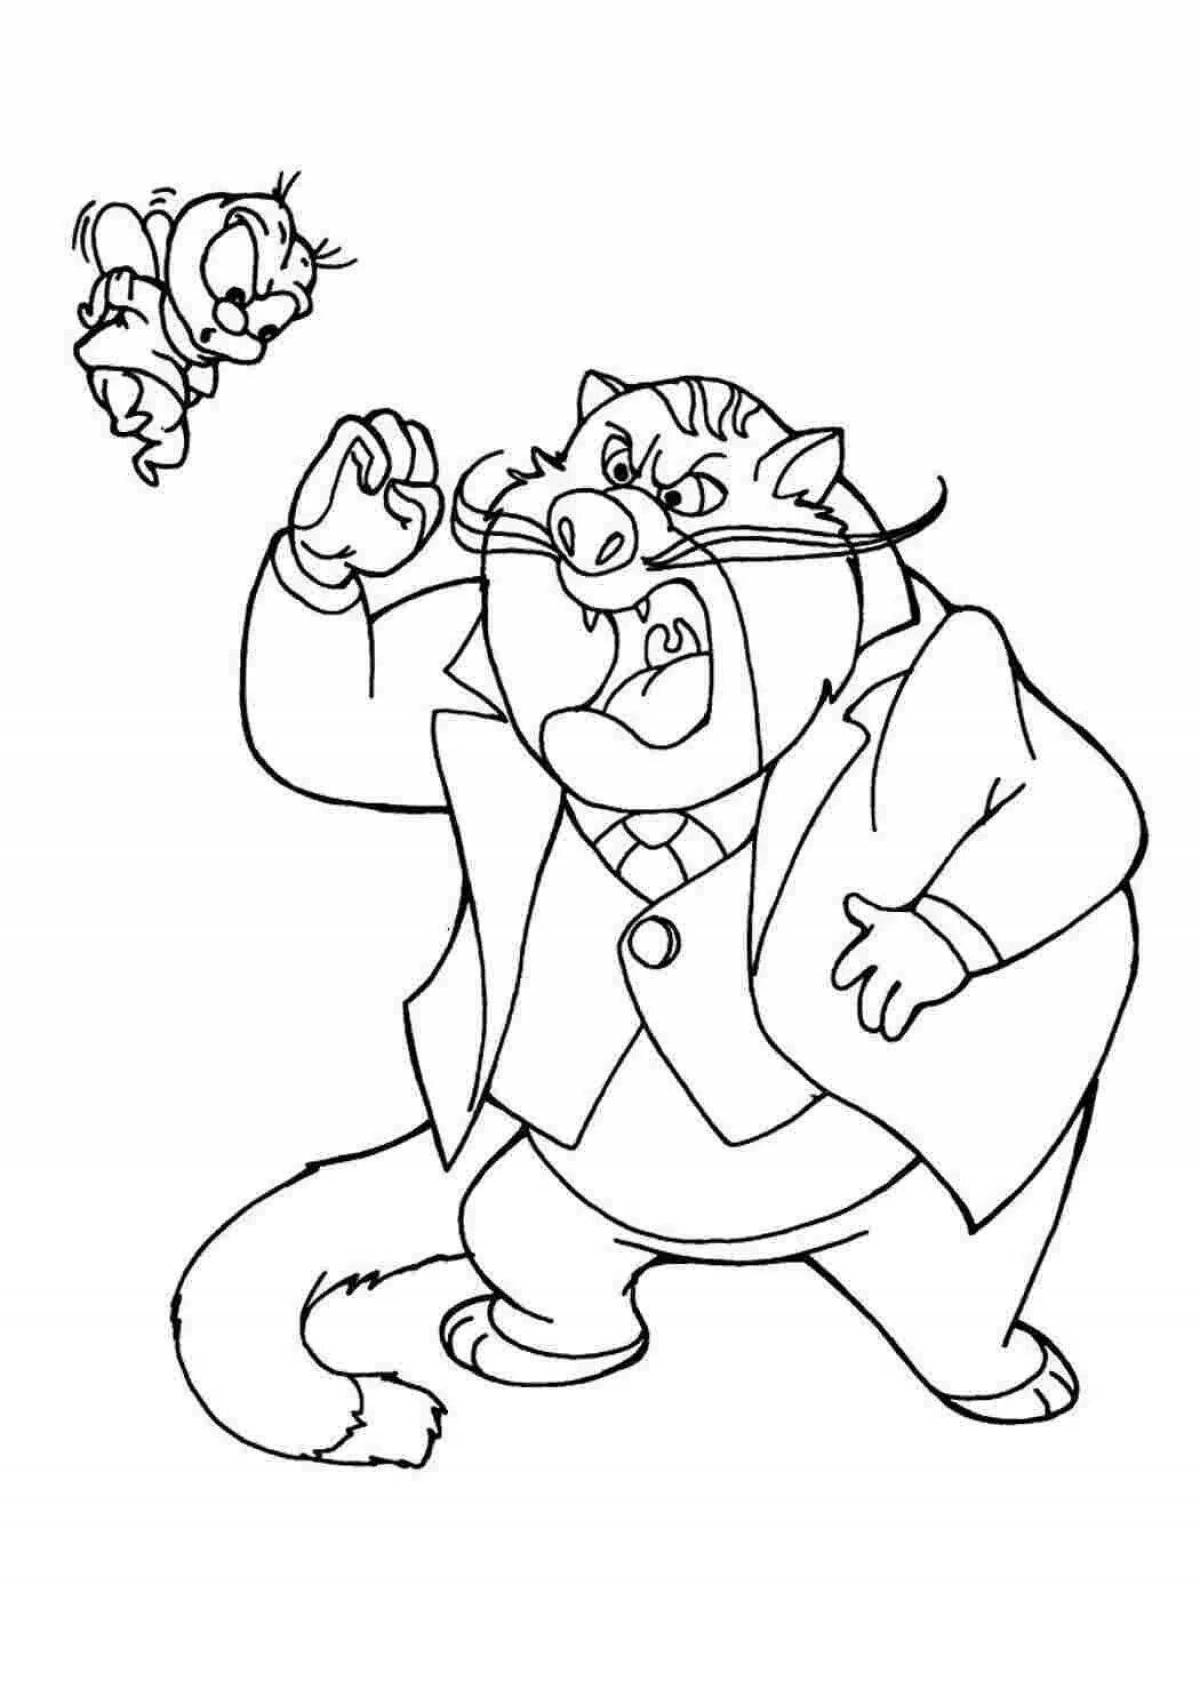 Chip and Dale Rescue Rangers coloring pages